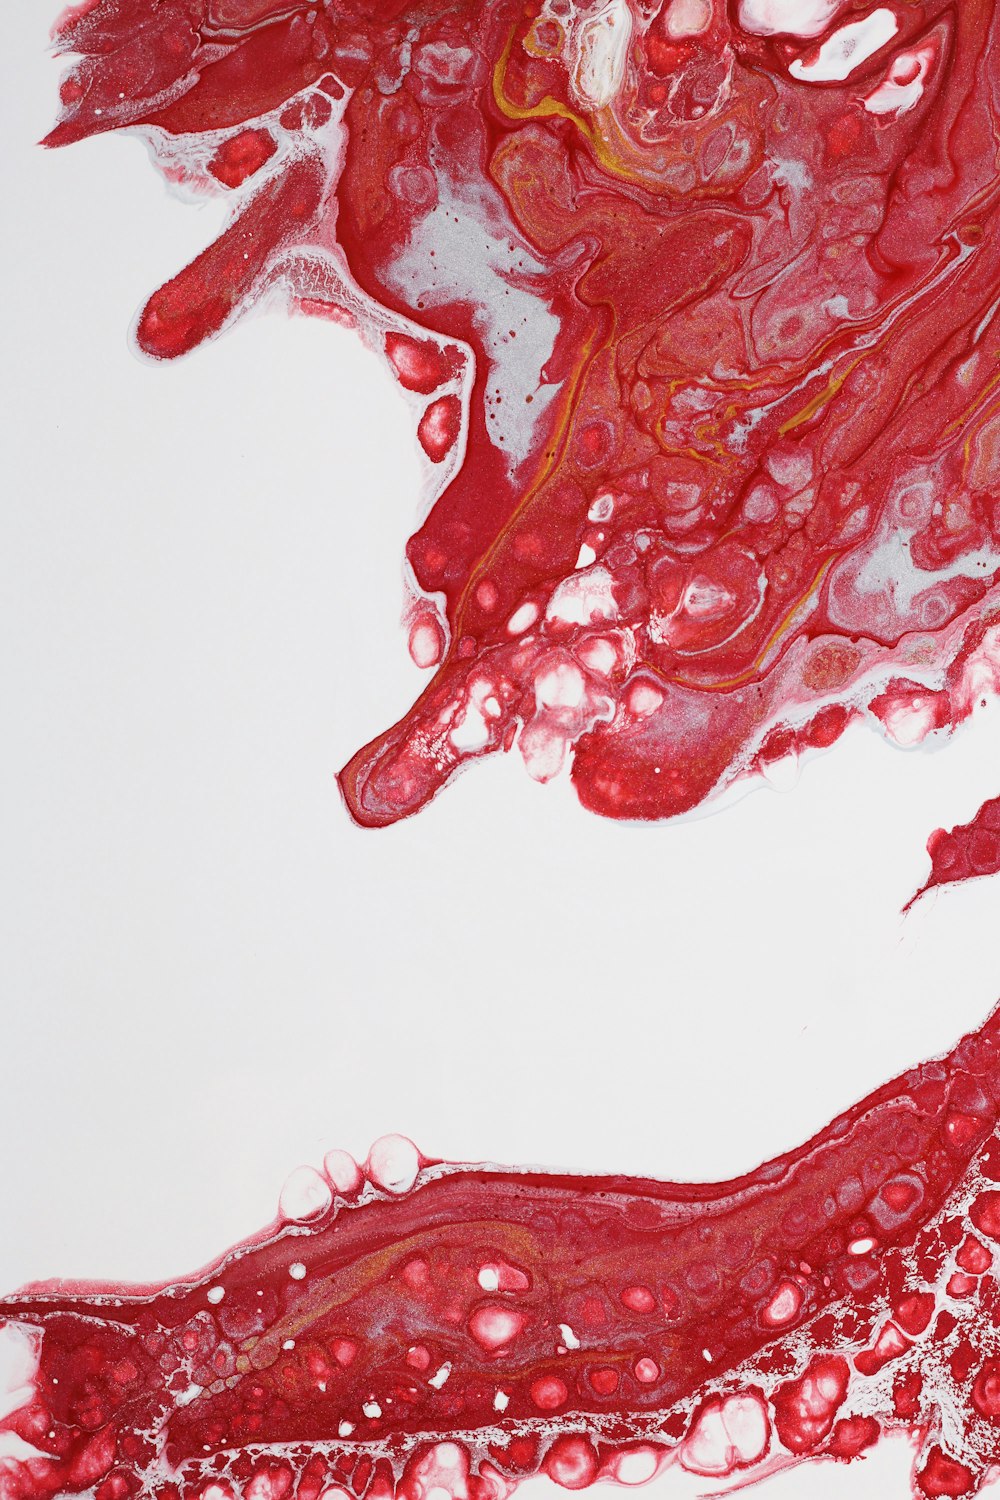 a close up of a red substance on a white surface